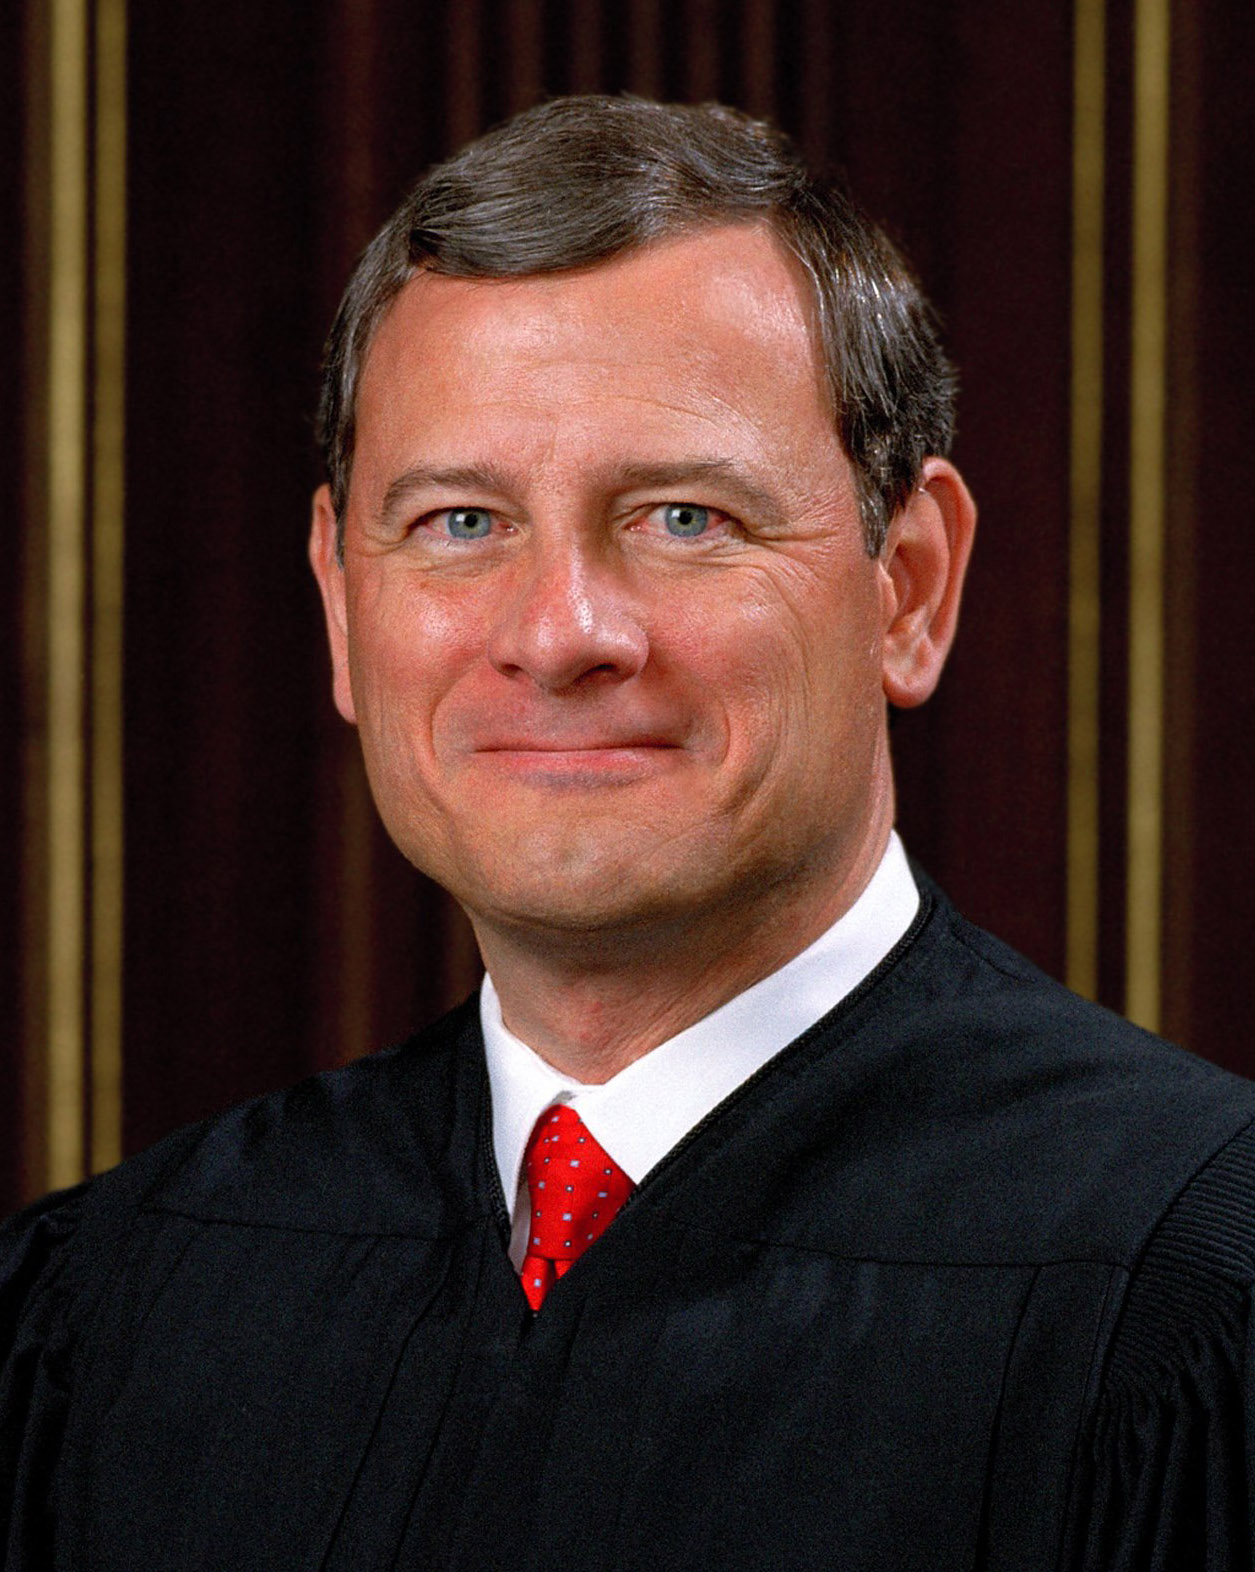 John Roberts - Chief Justice of the United States Supreme Court of ALL of We the People